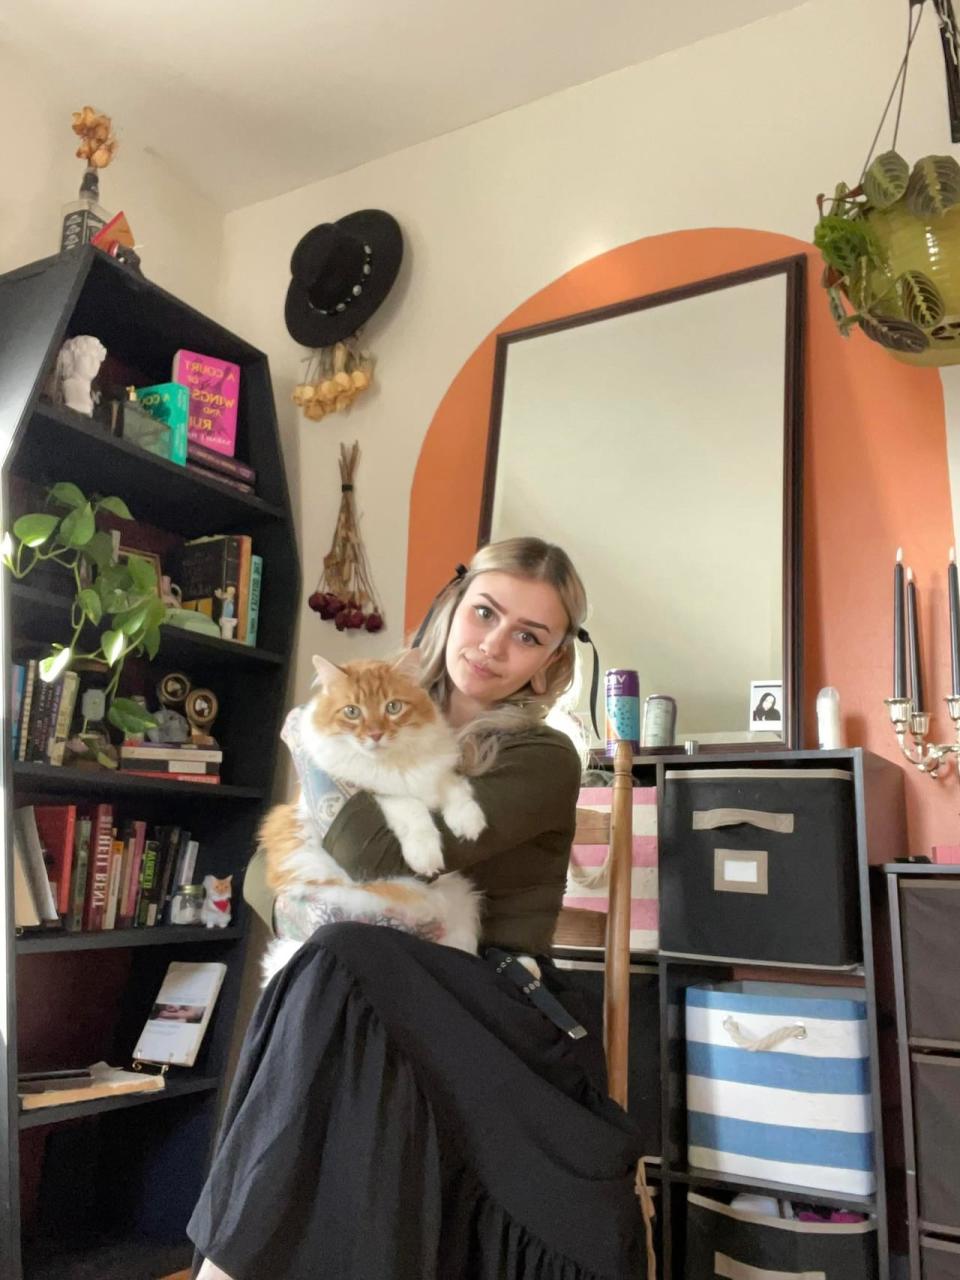 Milo Nunes, pictured with their cat Olive, had saved enough to move into an apartment of their own. But they fell victim to a rental scam on Facebook Marketplace.